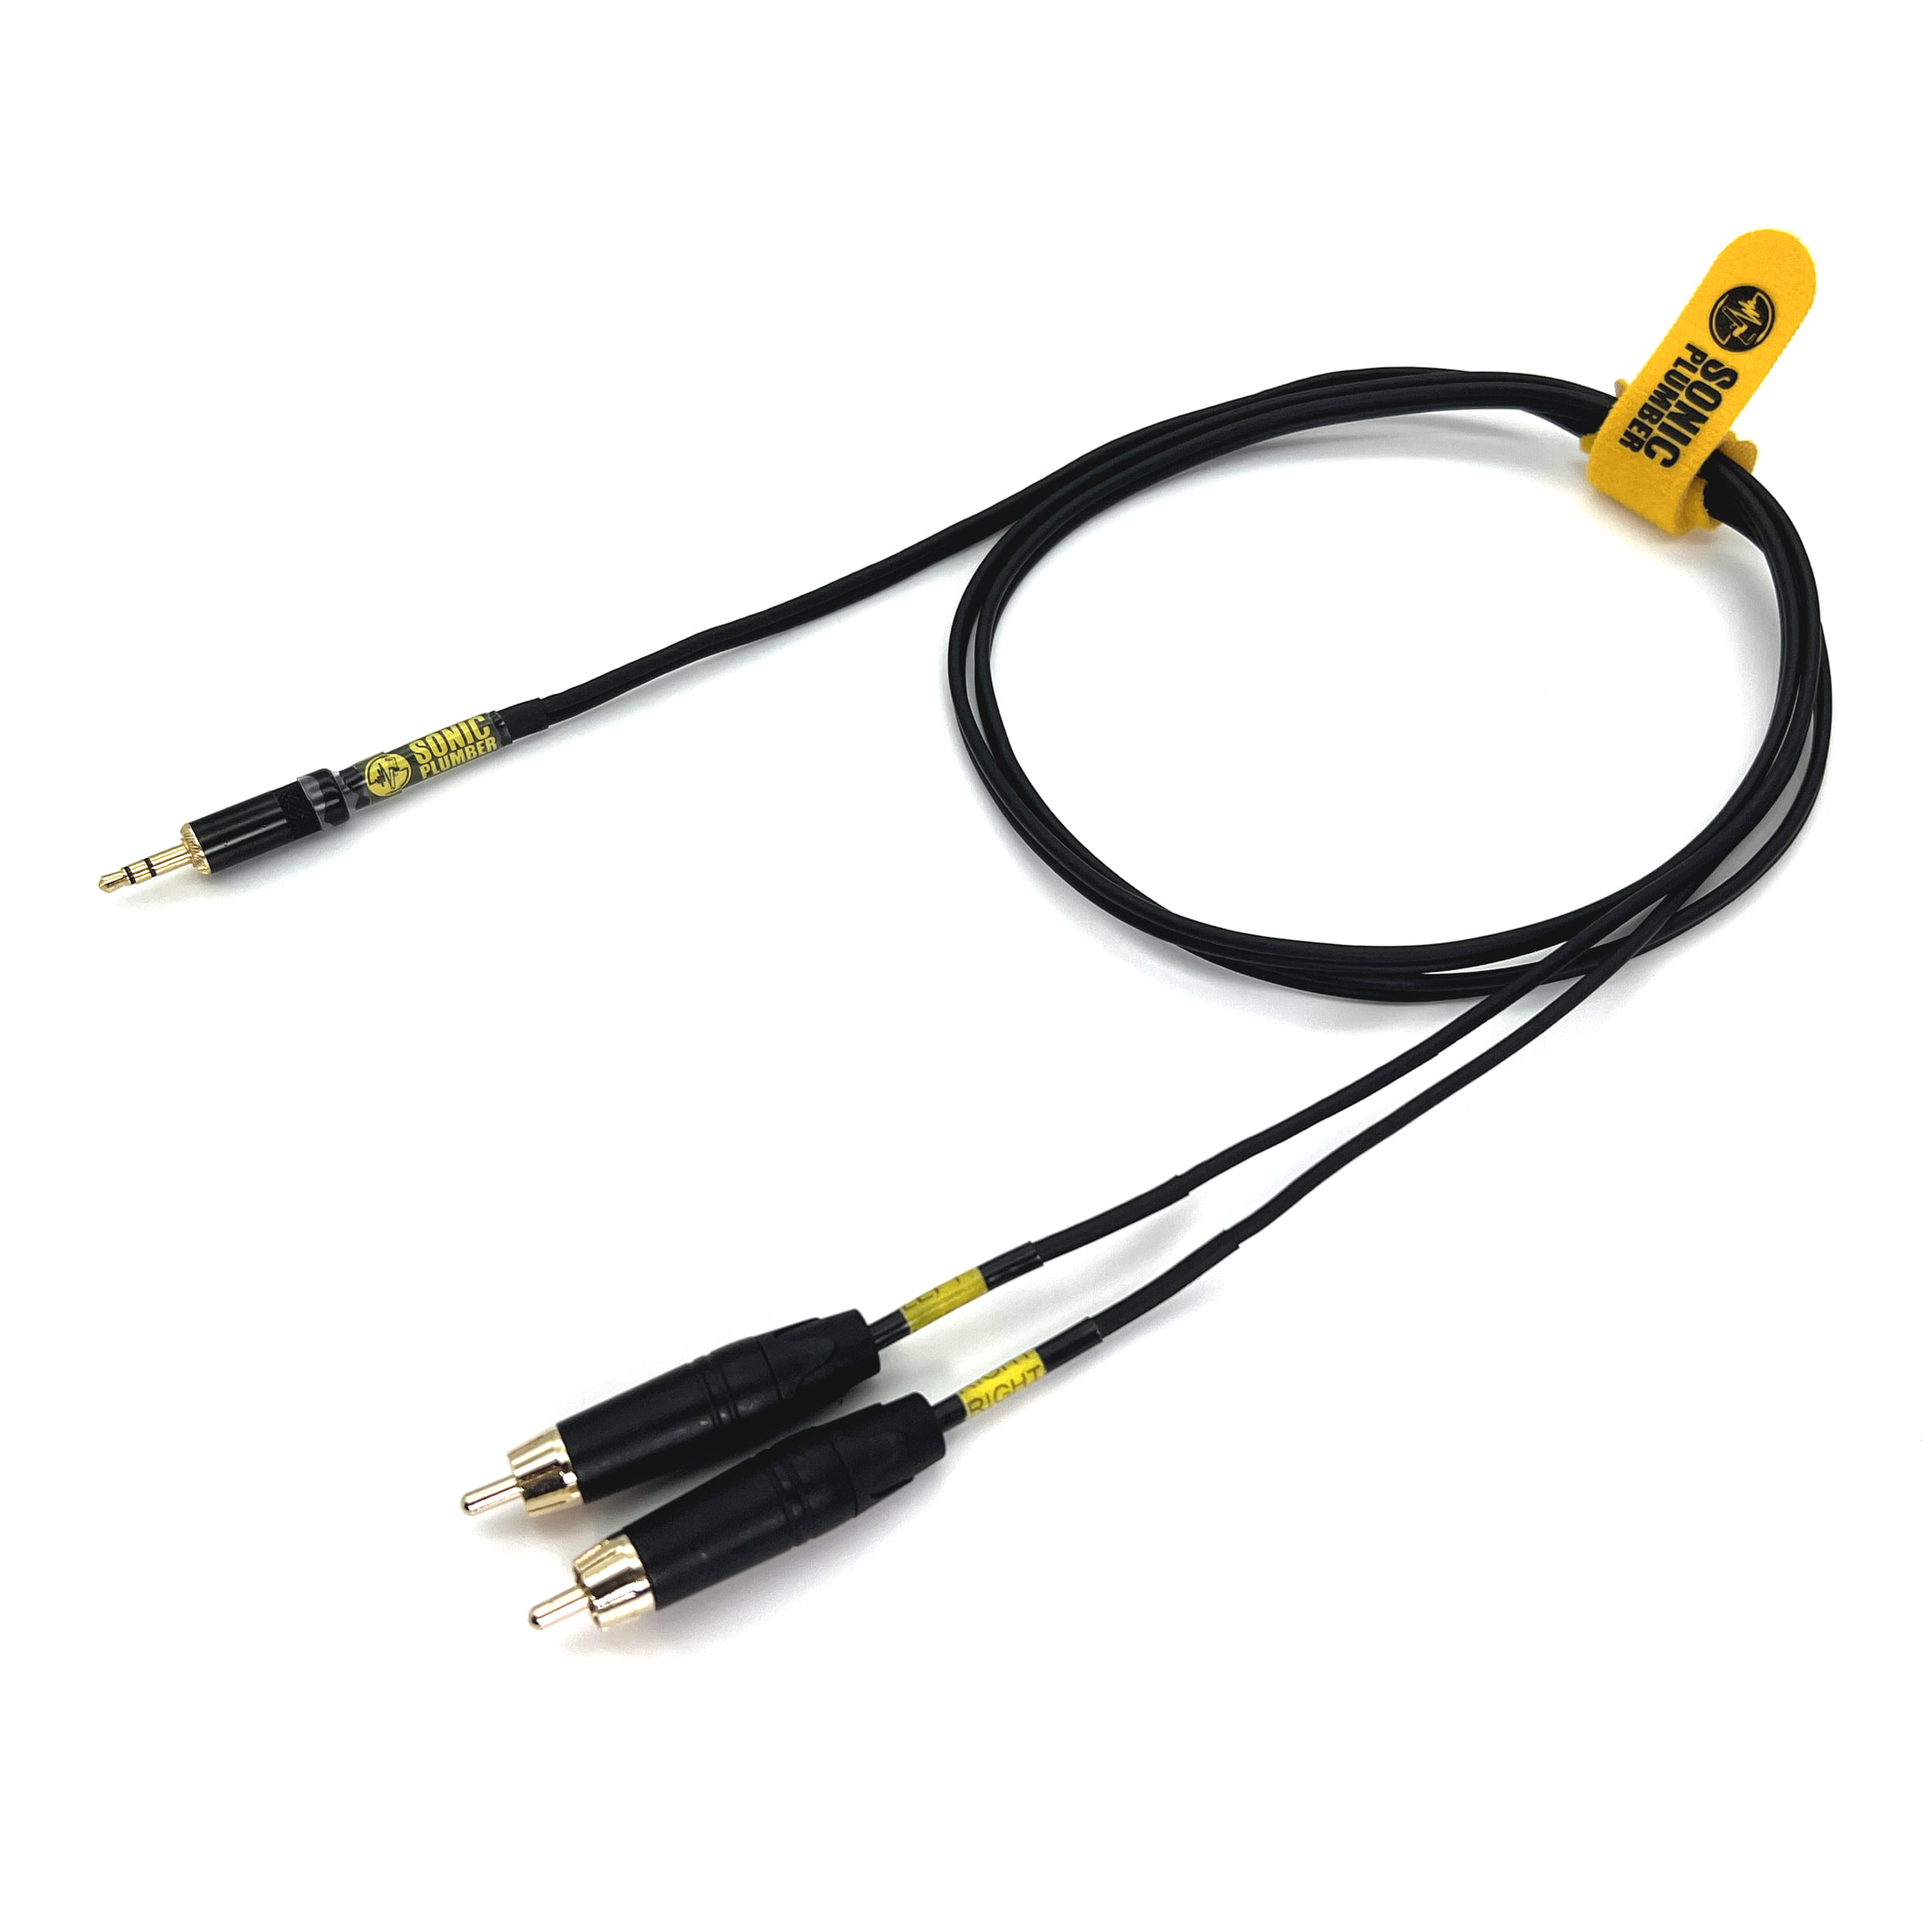 5-Pin MIDI Patch Cable - Revelation Cable Company